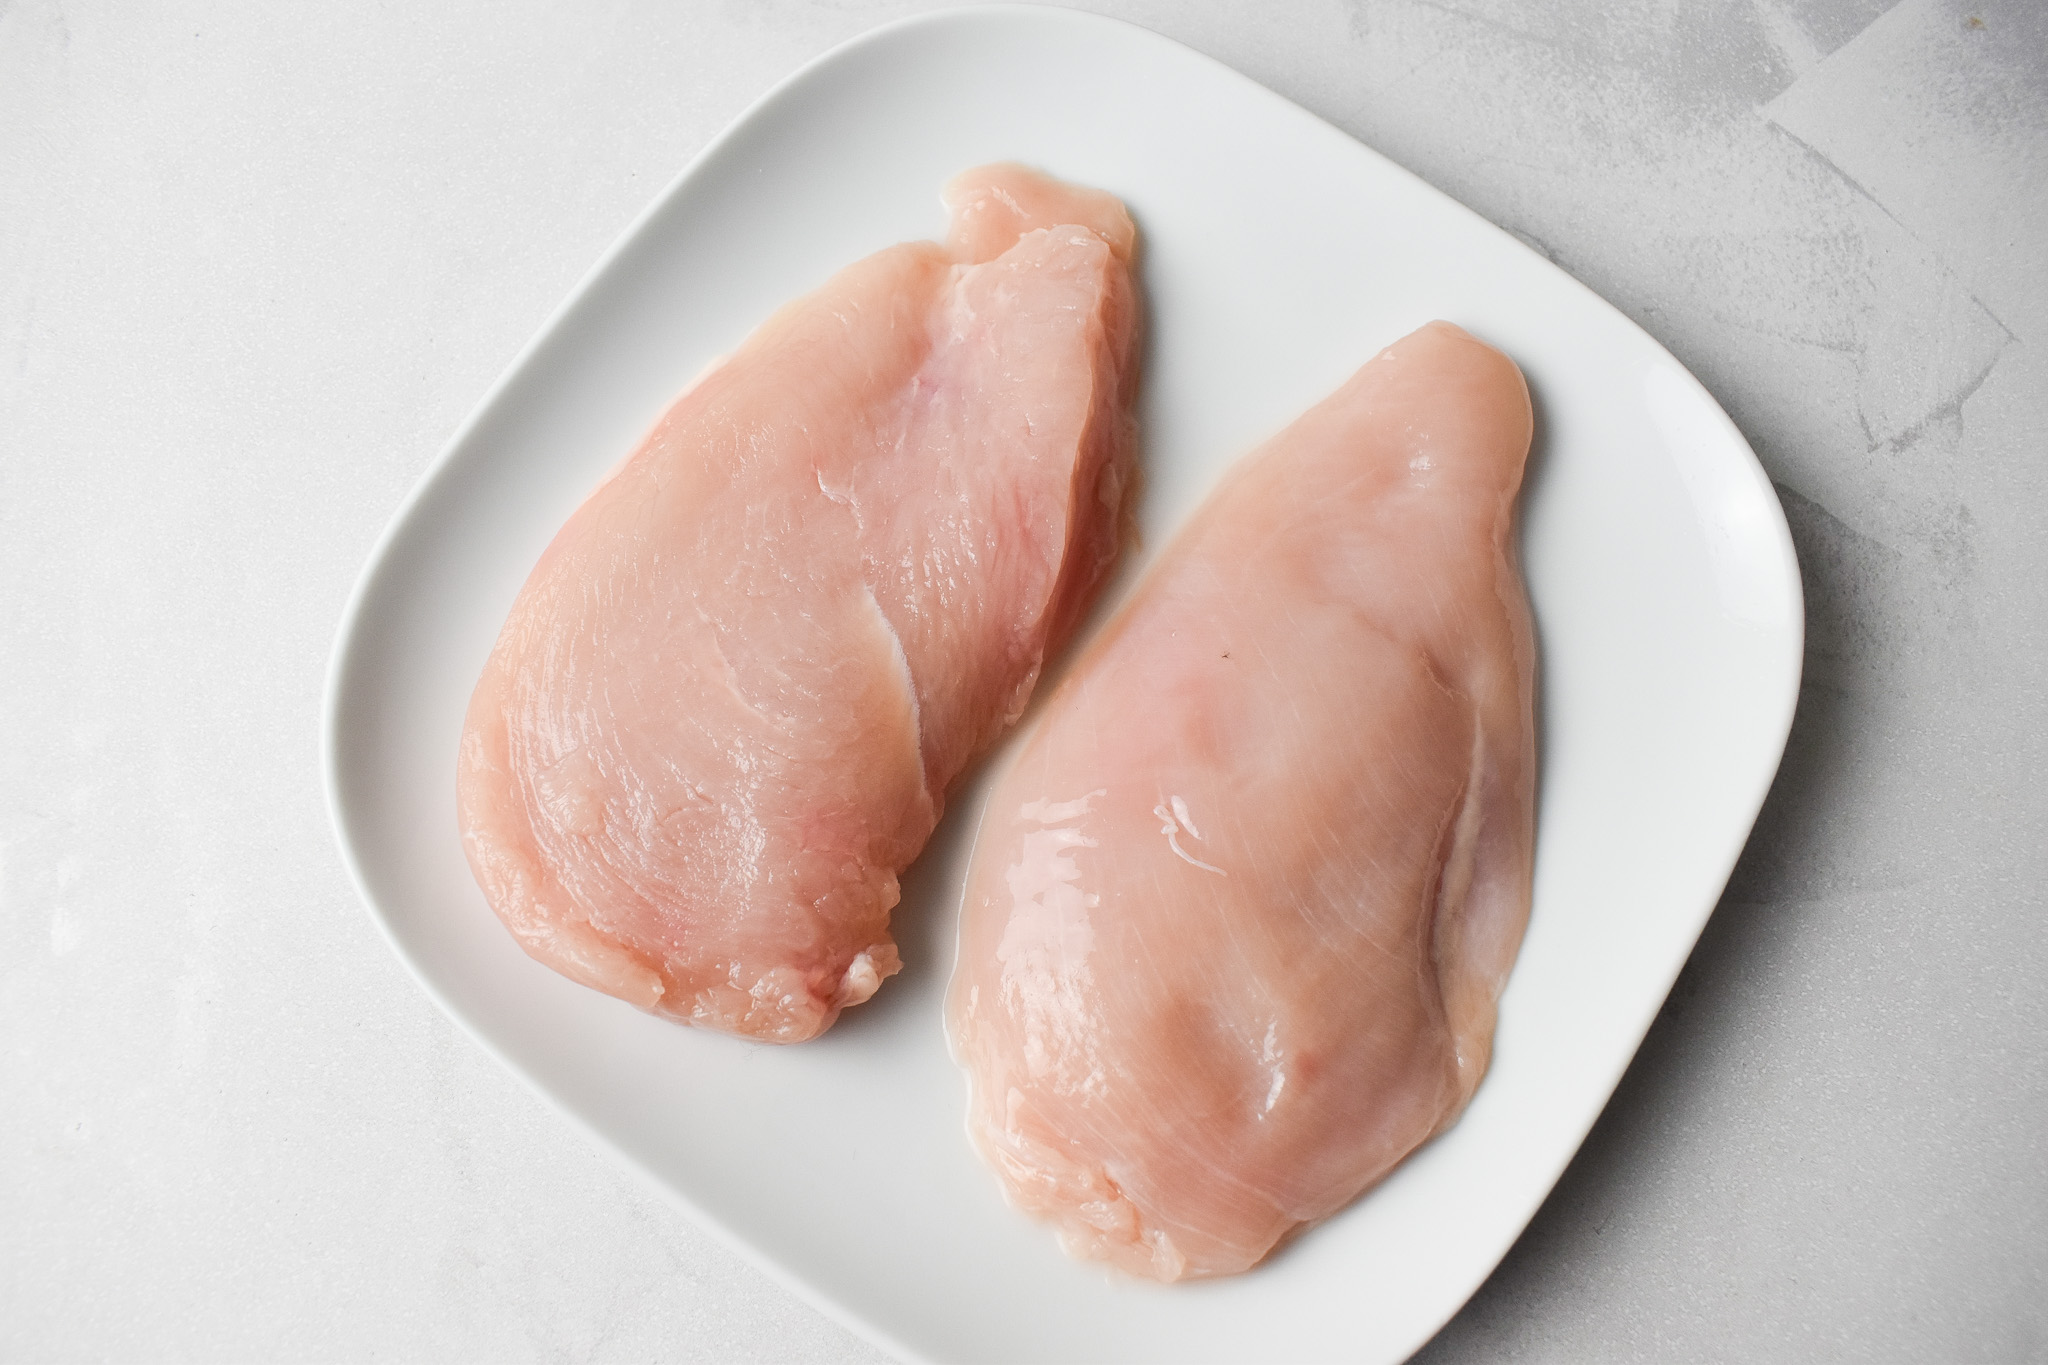 Raw chicken breast sliced in half lengthway on small [plate.